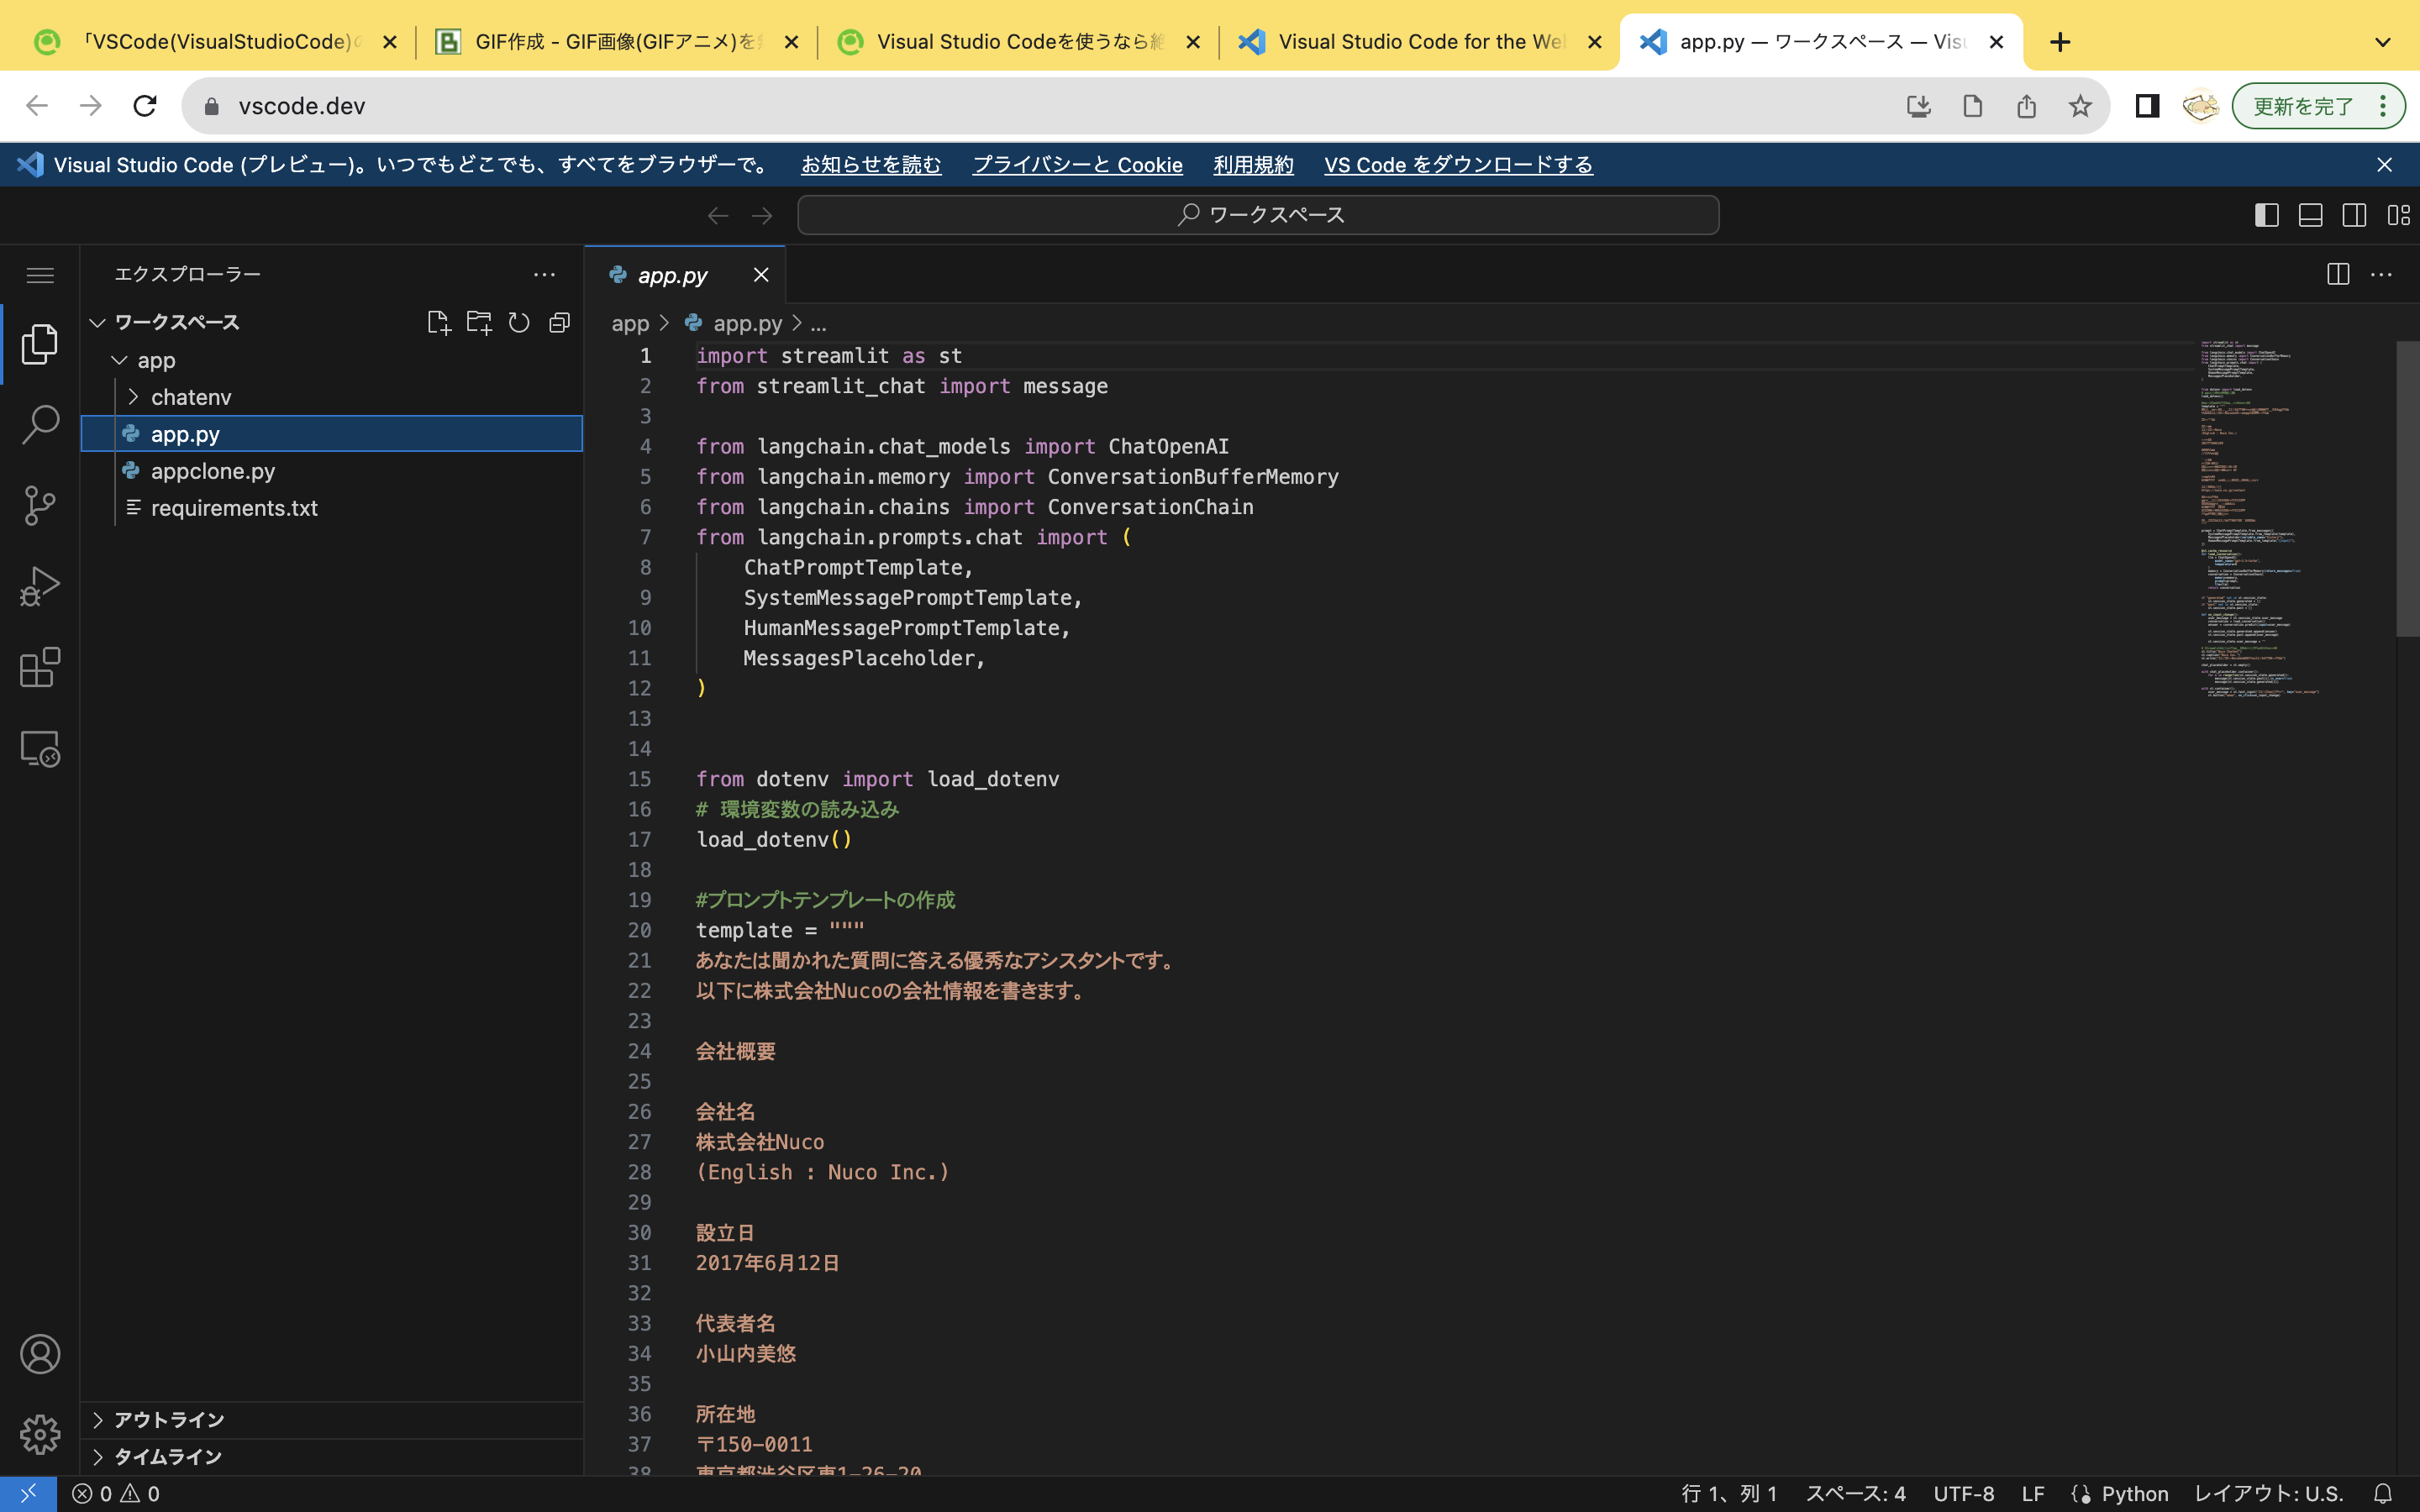 VScode for Web.png